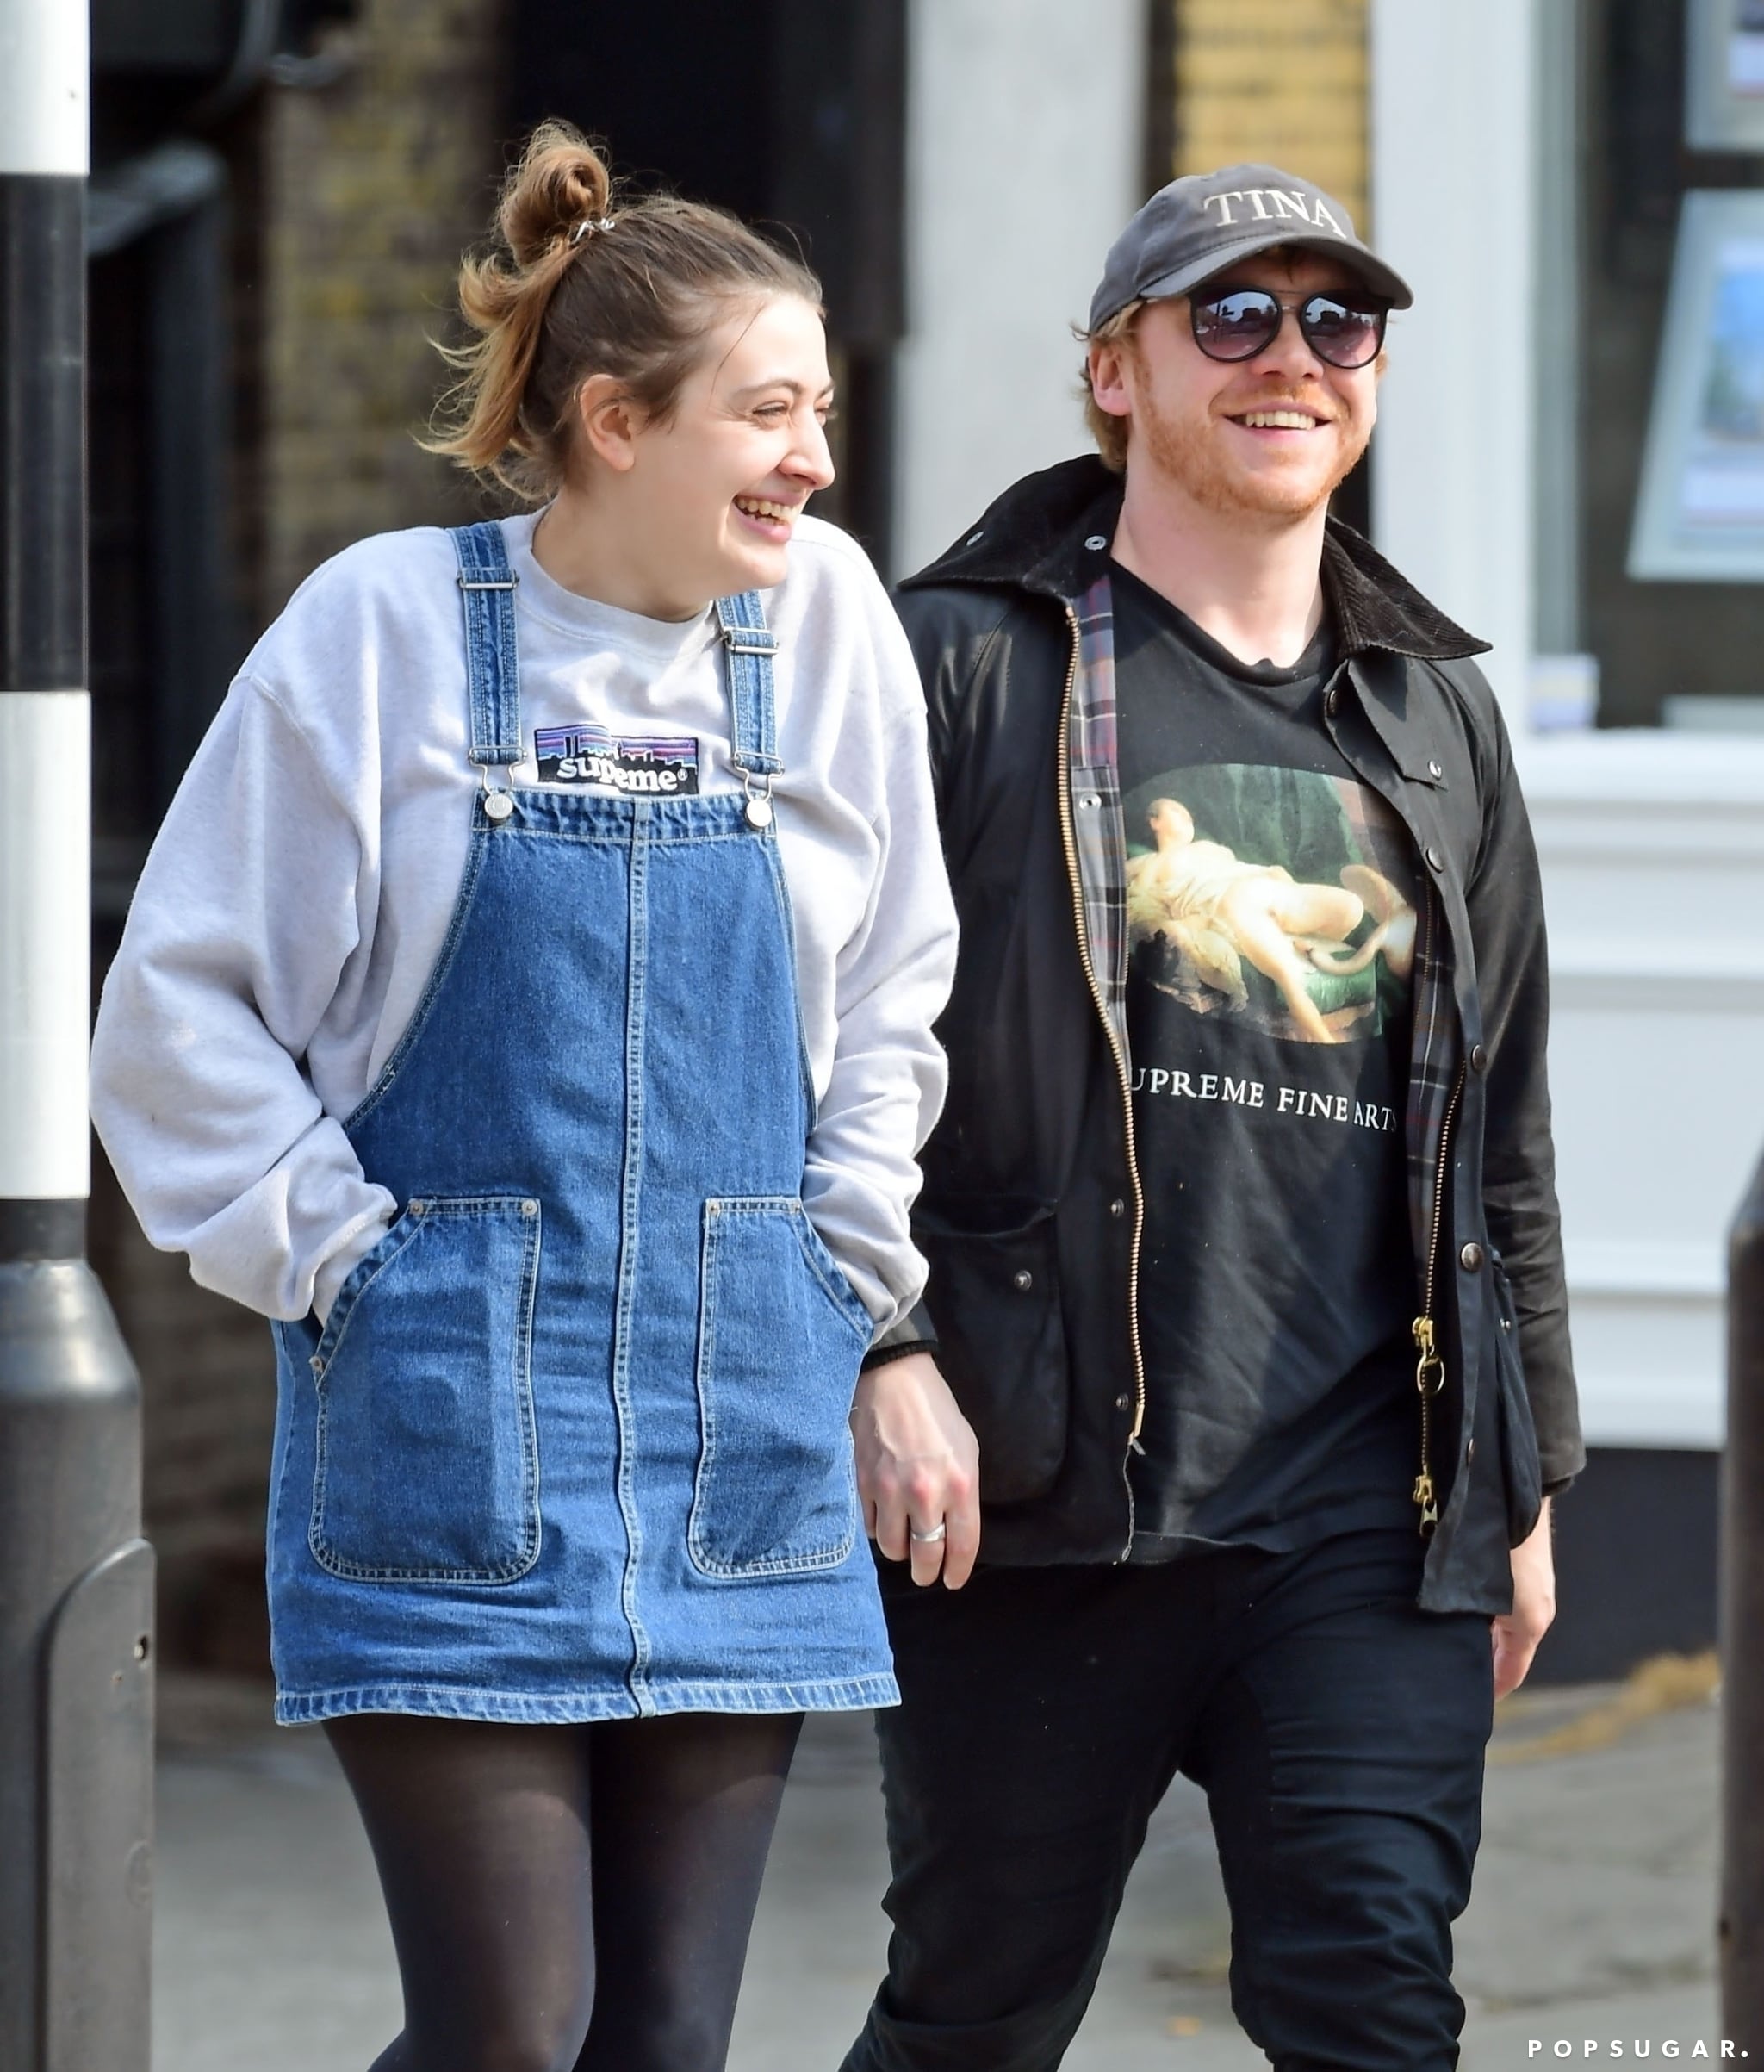 London, UNITED KINGDOM  - *EXCLUSIVE*  -  Harry Potter actor Rupert Grint and longtime girlfriend Georgia Groome pictured out enjoying lunch together and both sporting wedding bands. The loved up couple were out with friends having a great time at a very village themed looking pub in plush Highgate, North London. Is it possible that the our beloved Harry Potter